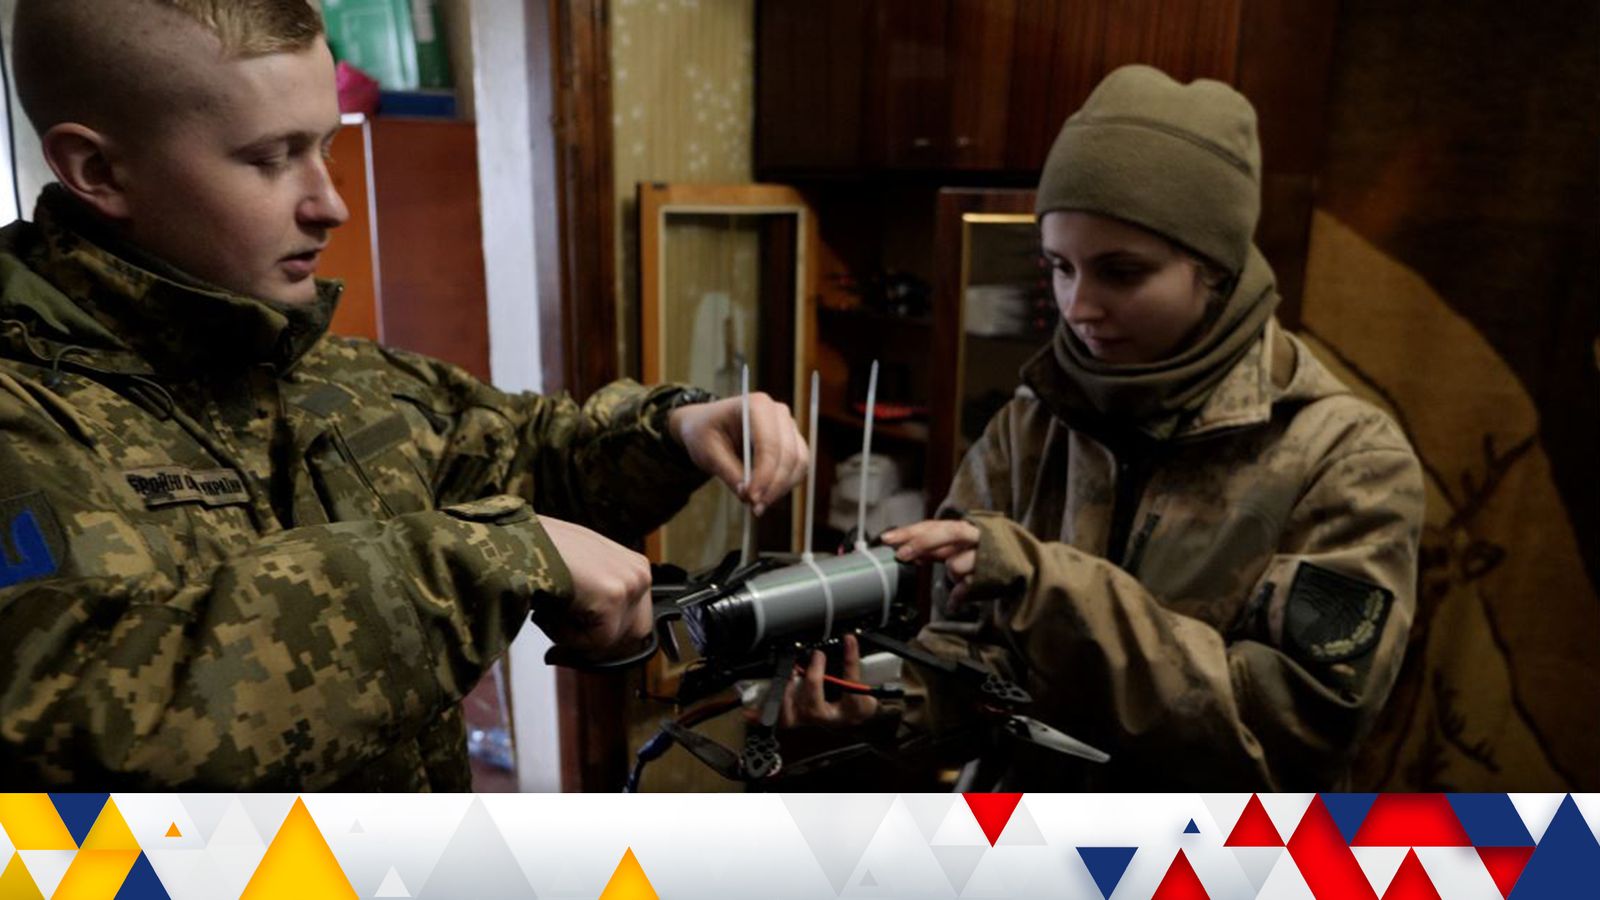 Young Ukrainians risking their lives building deadly kamikaze drones to hunt down and kill Russian soldiers